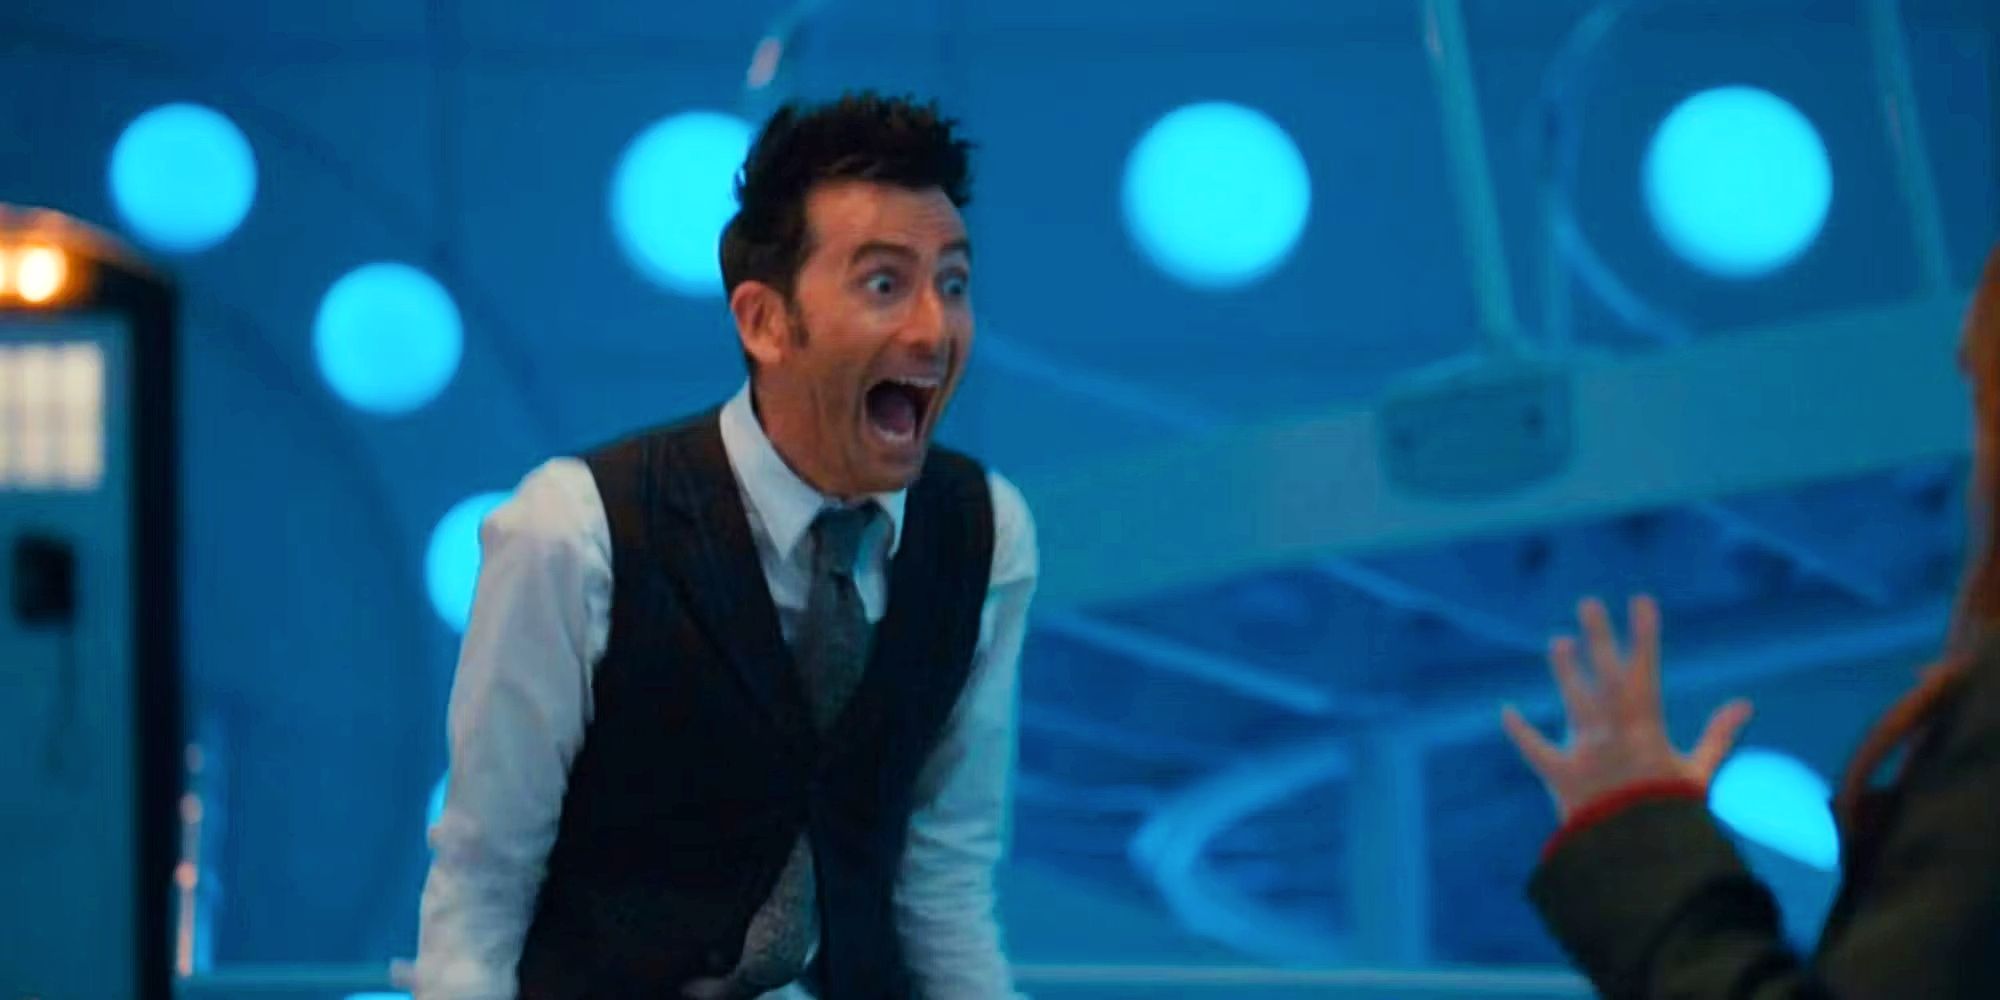 David Tennant screaming excitedly in Doctor Who